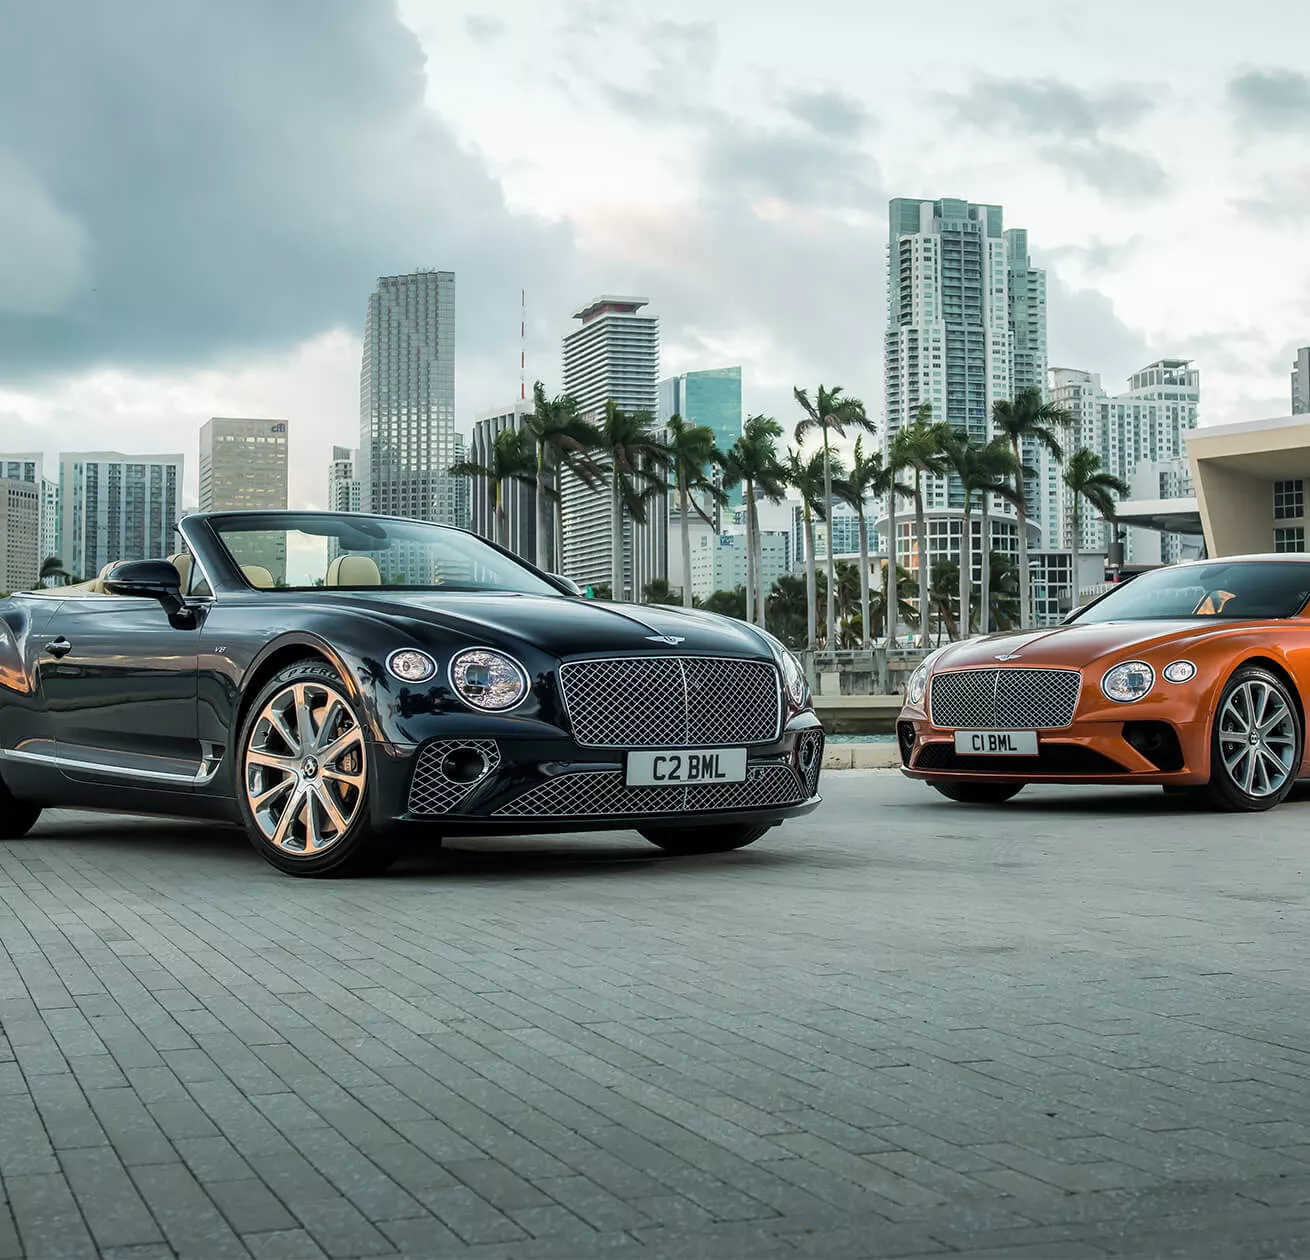 2 Bentleys infront of a city scape